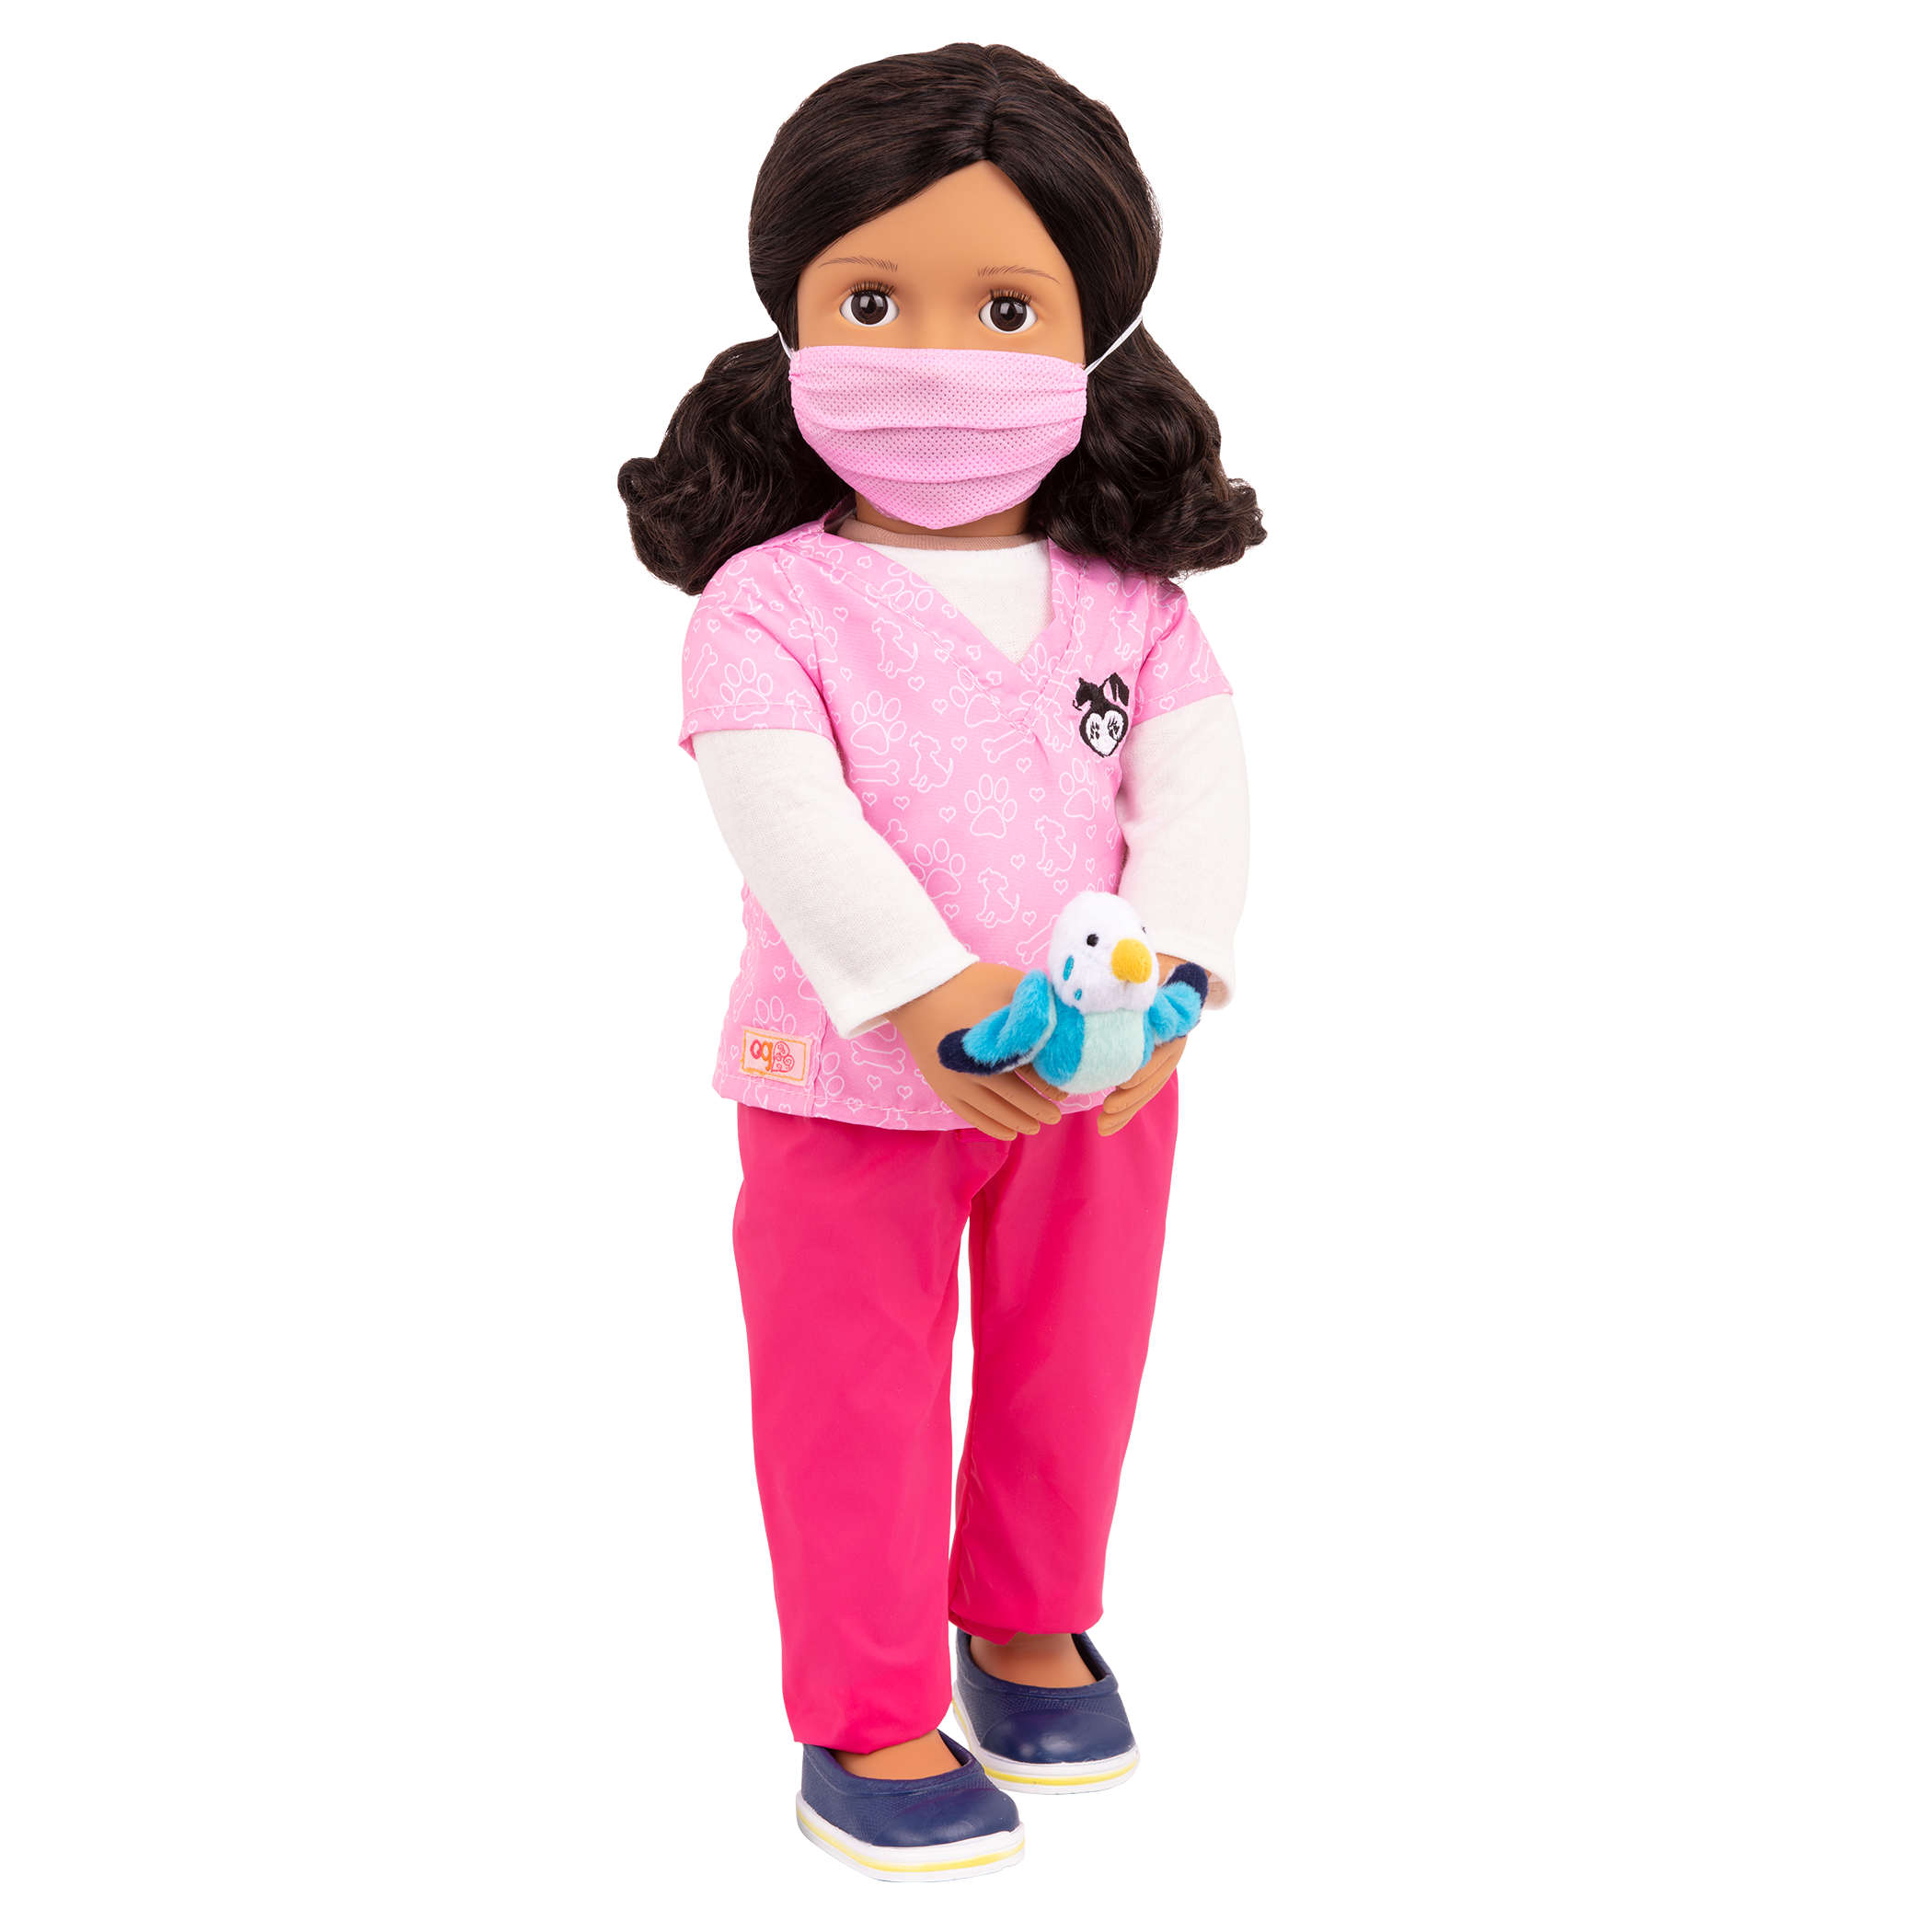 18-inch veterinarian doll with brown hair, brown eyes and vet accessories